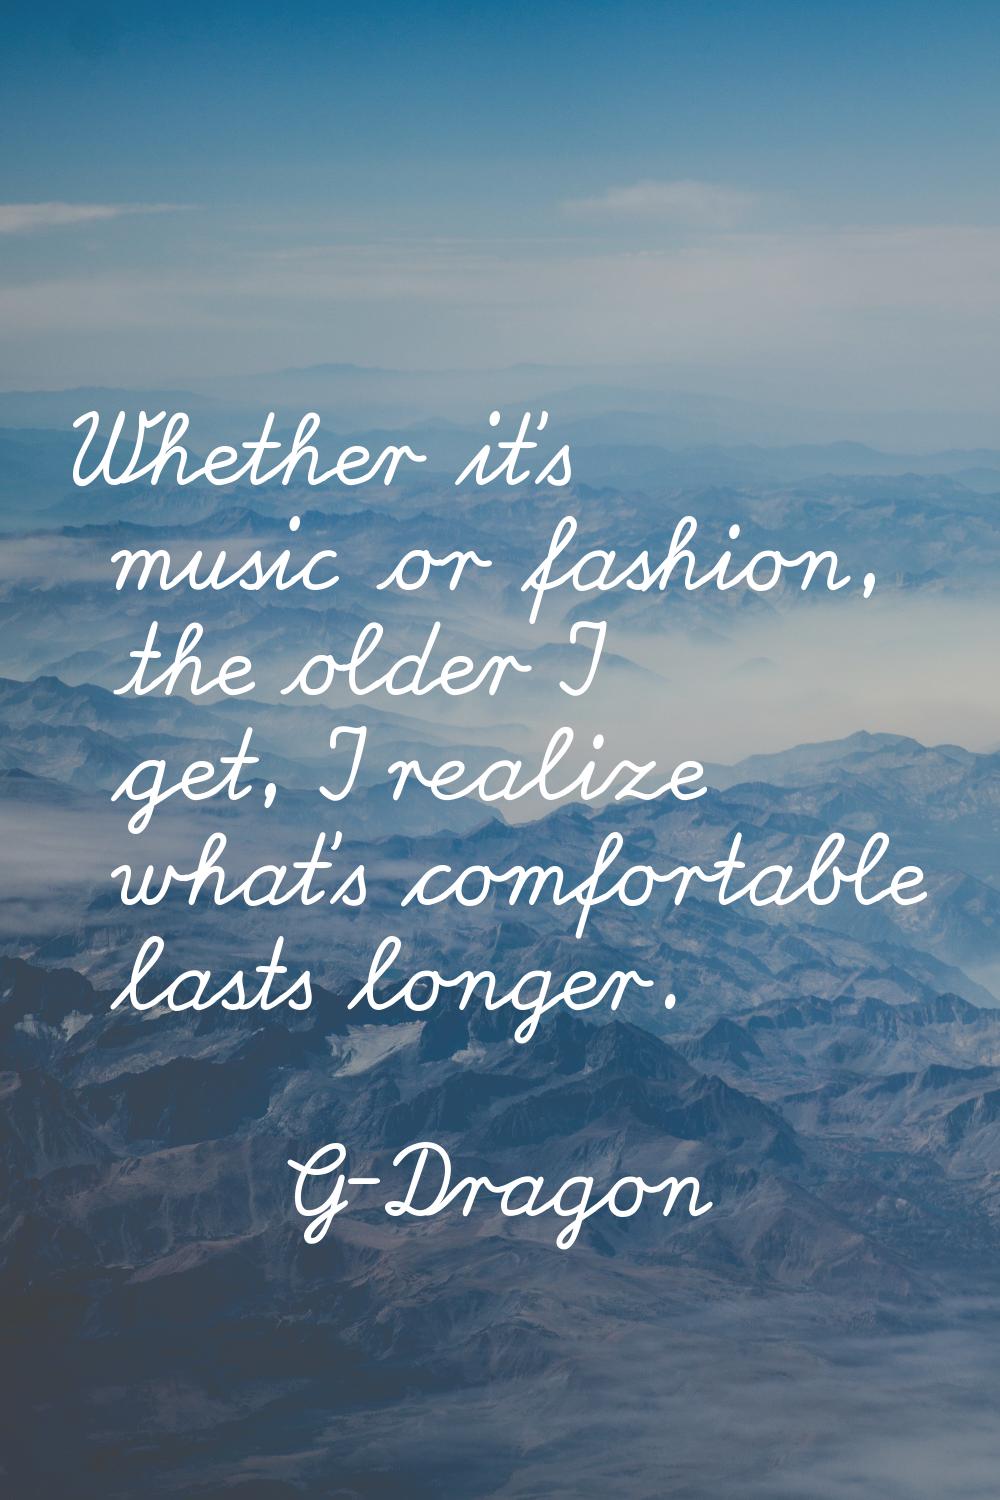 Whether it's music or fashion, the older I get, I realize what's comfortable lasts longer.